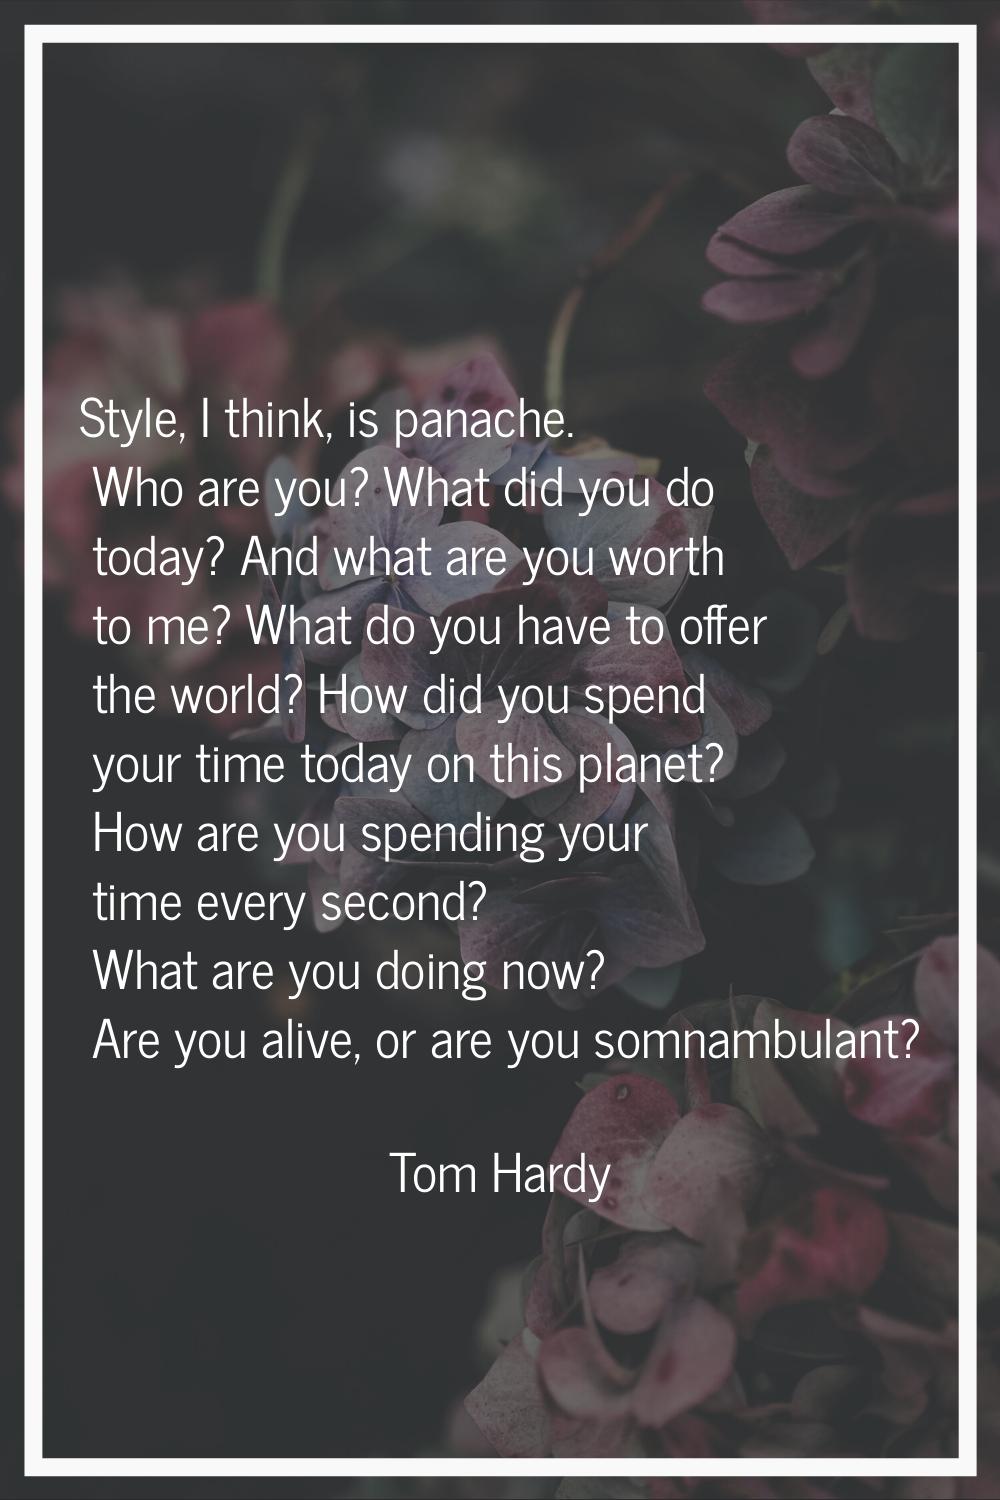 Style, I think, is panache. Who are you? What did you do today? And what are you worth to me? What 